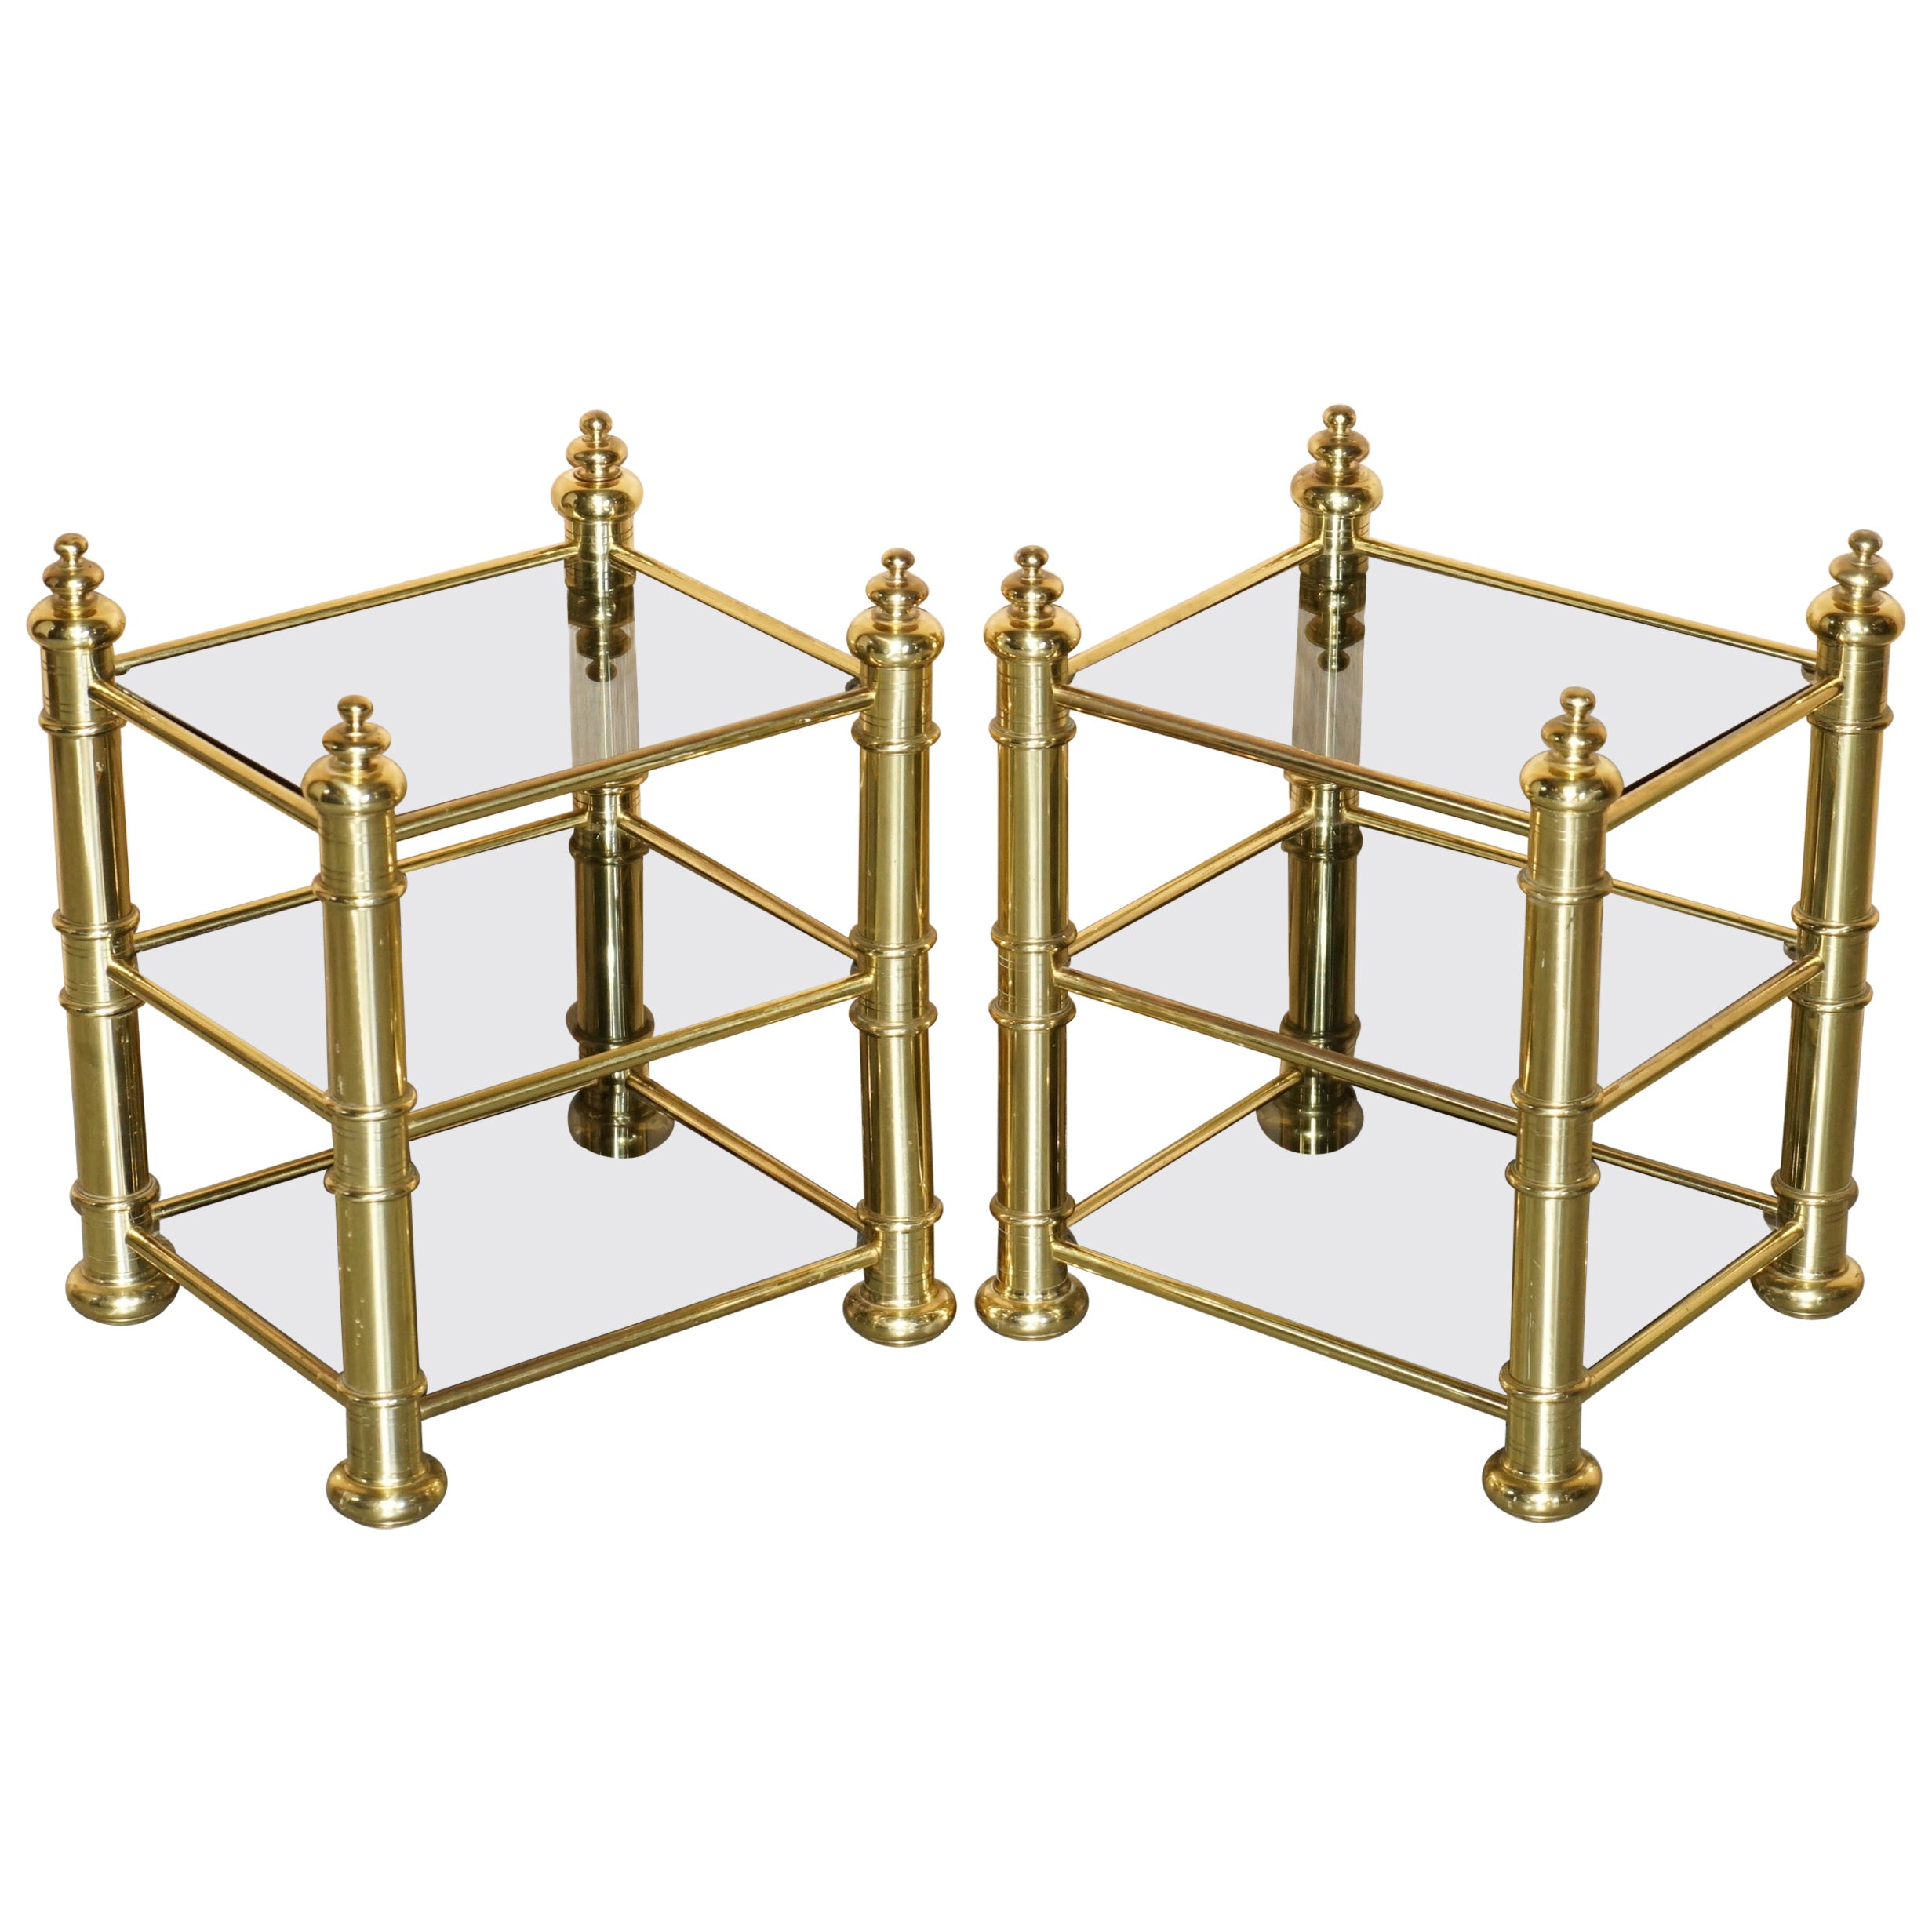 ViNTAGE PAIR OF MID CENTURY MODERN BRASS & SMOKED GLASS ETAGERE SIDE END TABLES